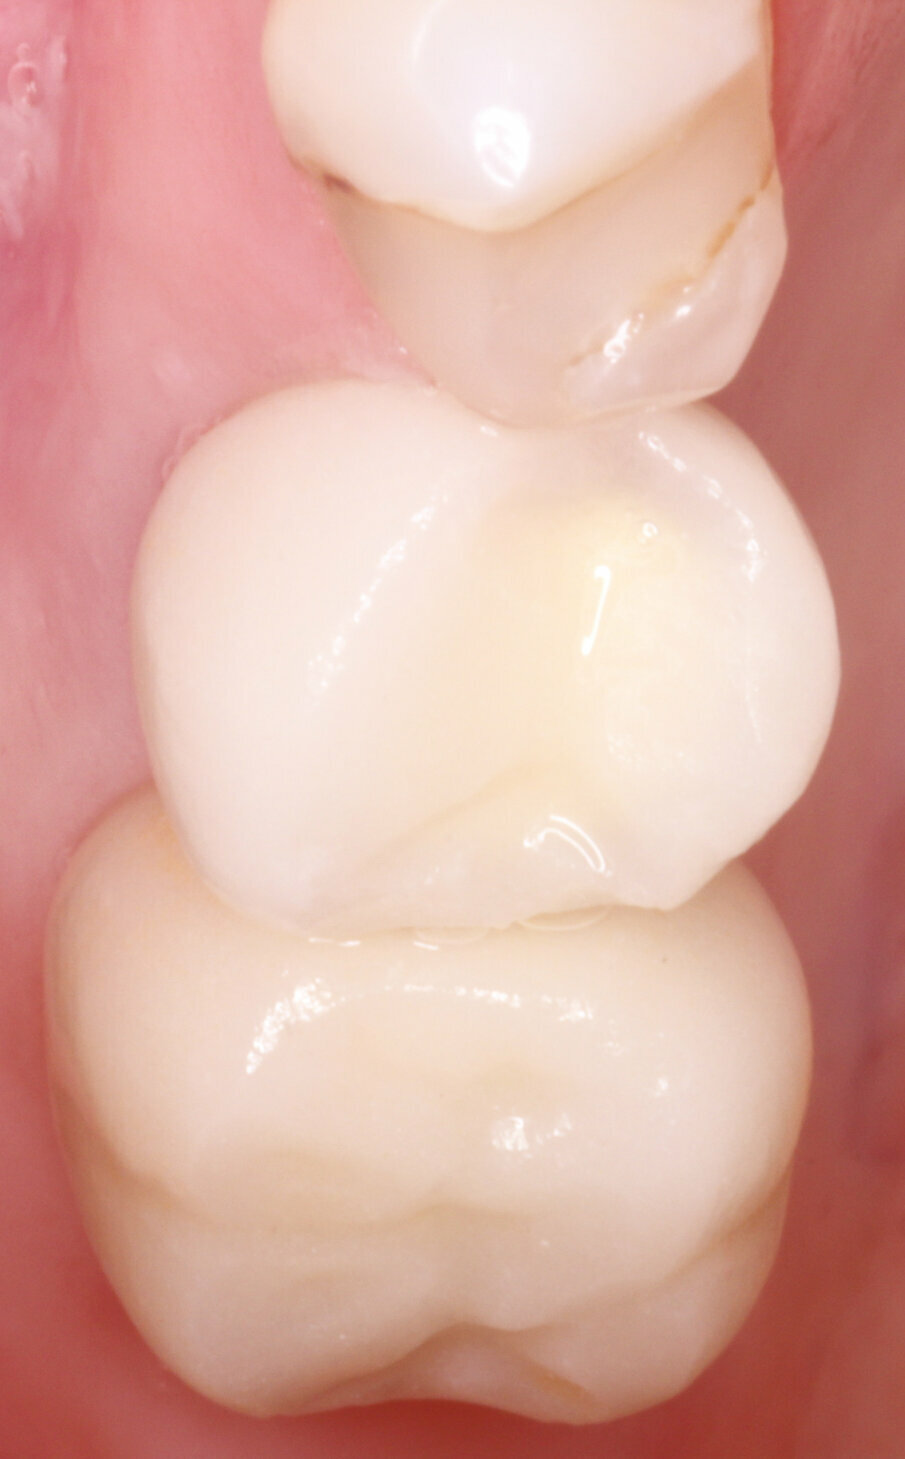 Figs.17: Final zirconia crowns placed